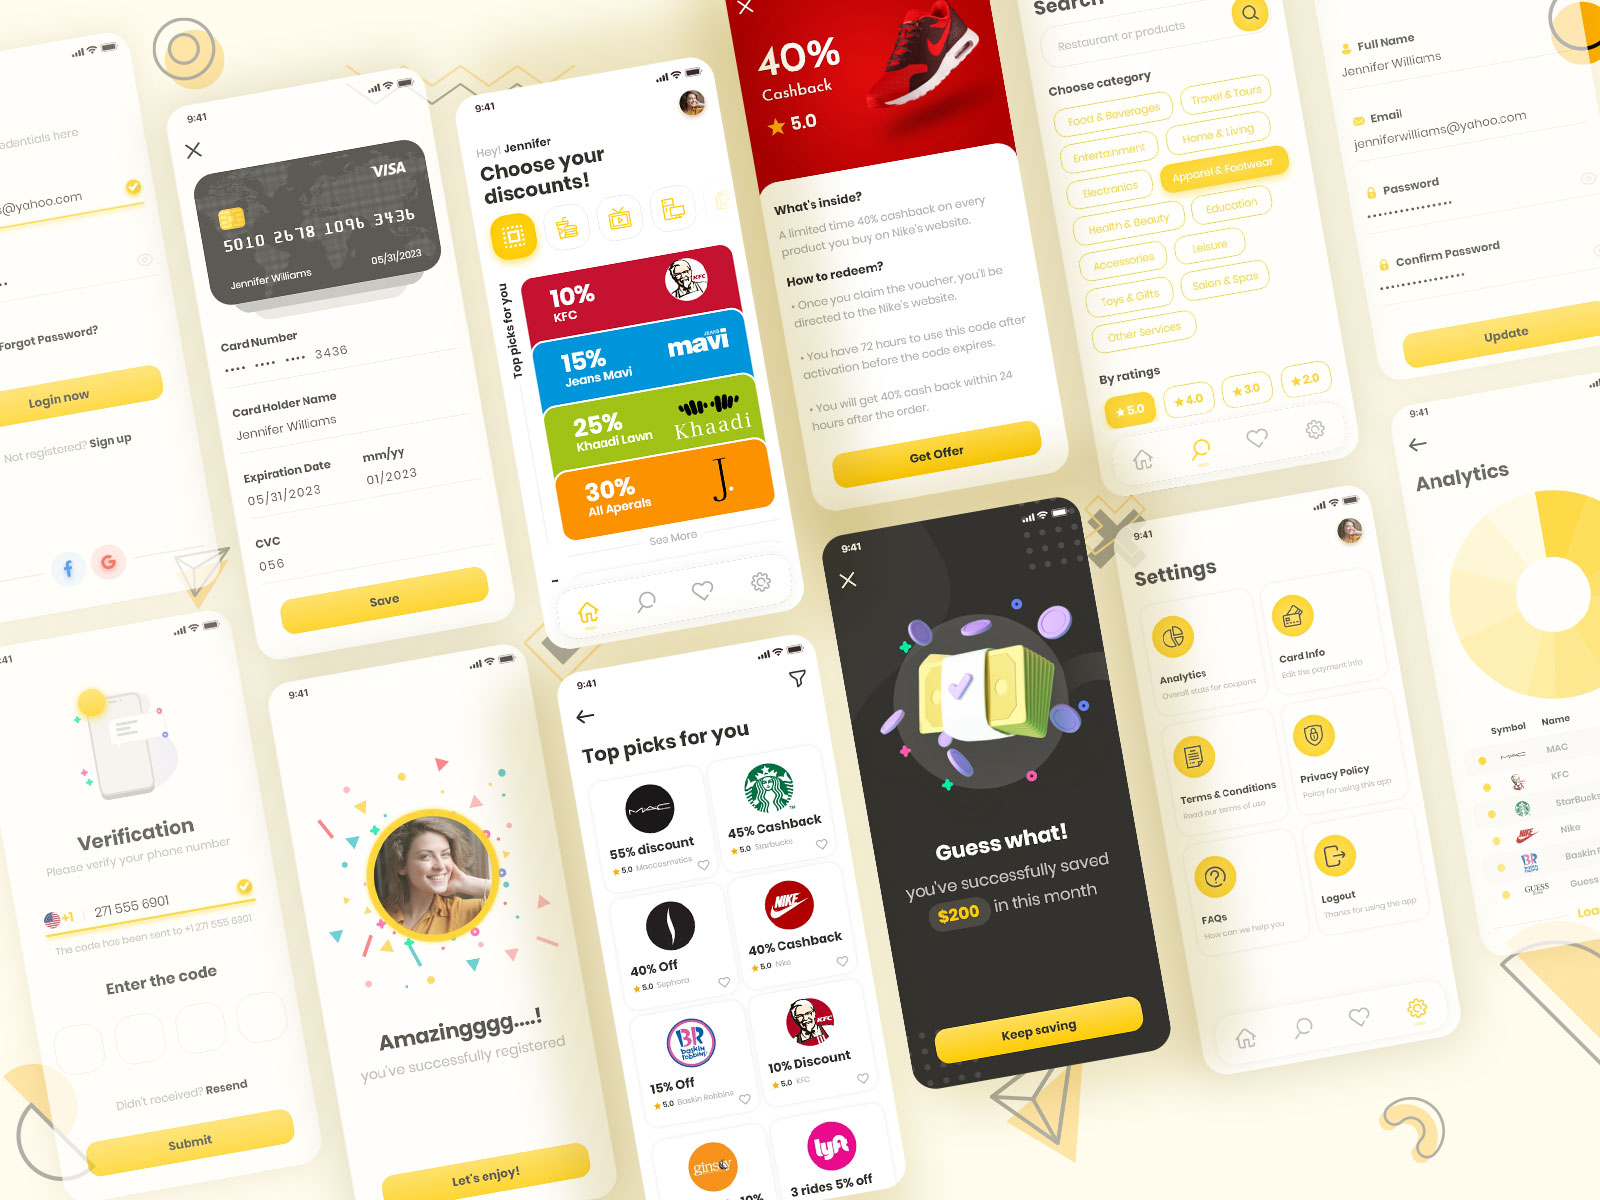 OLX App Redesign - UpLabs